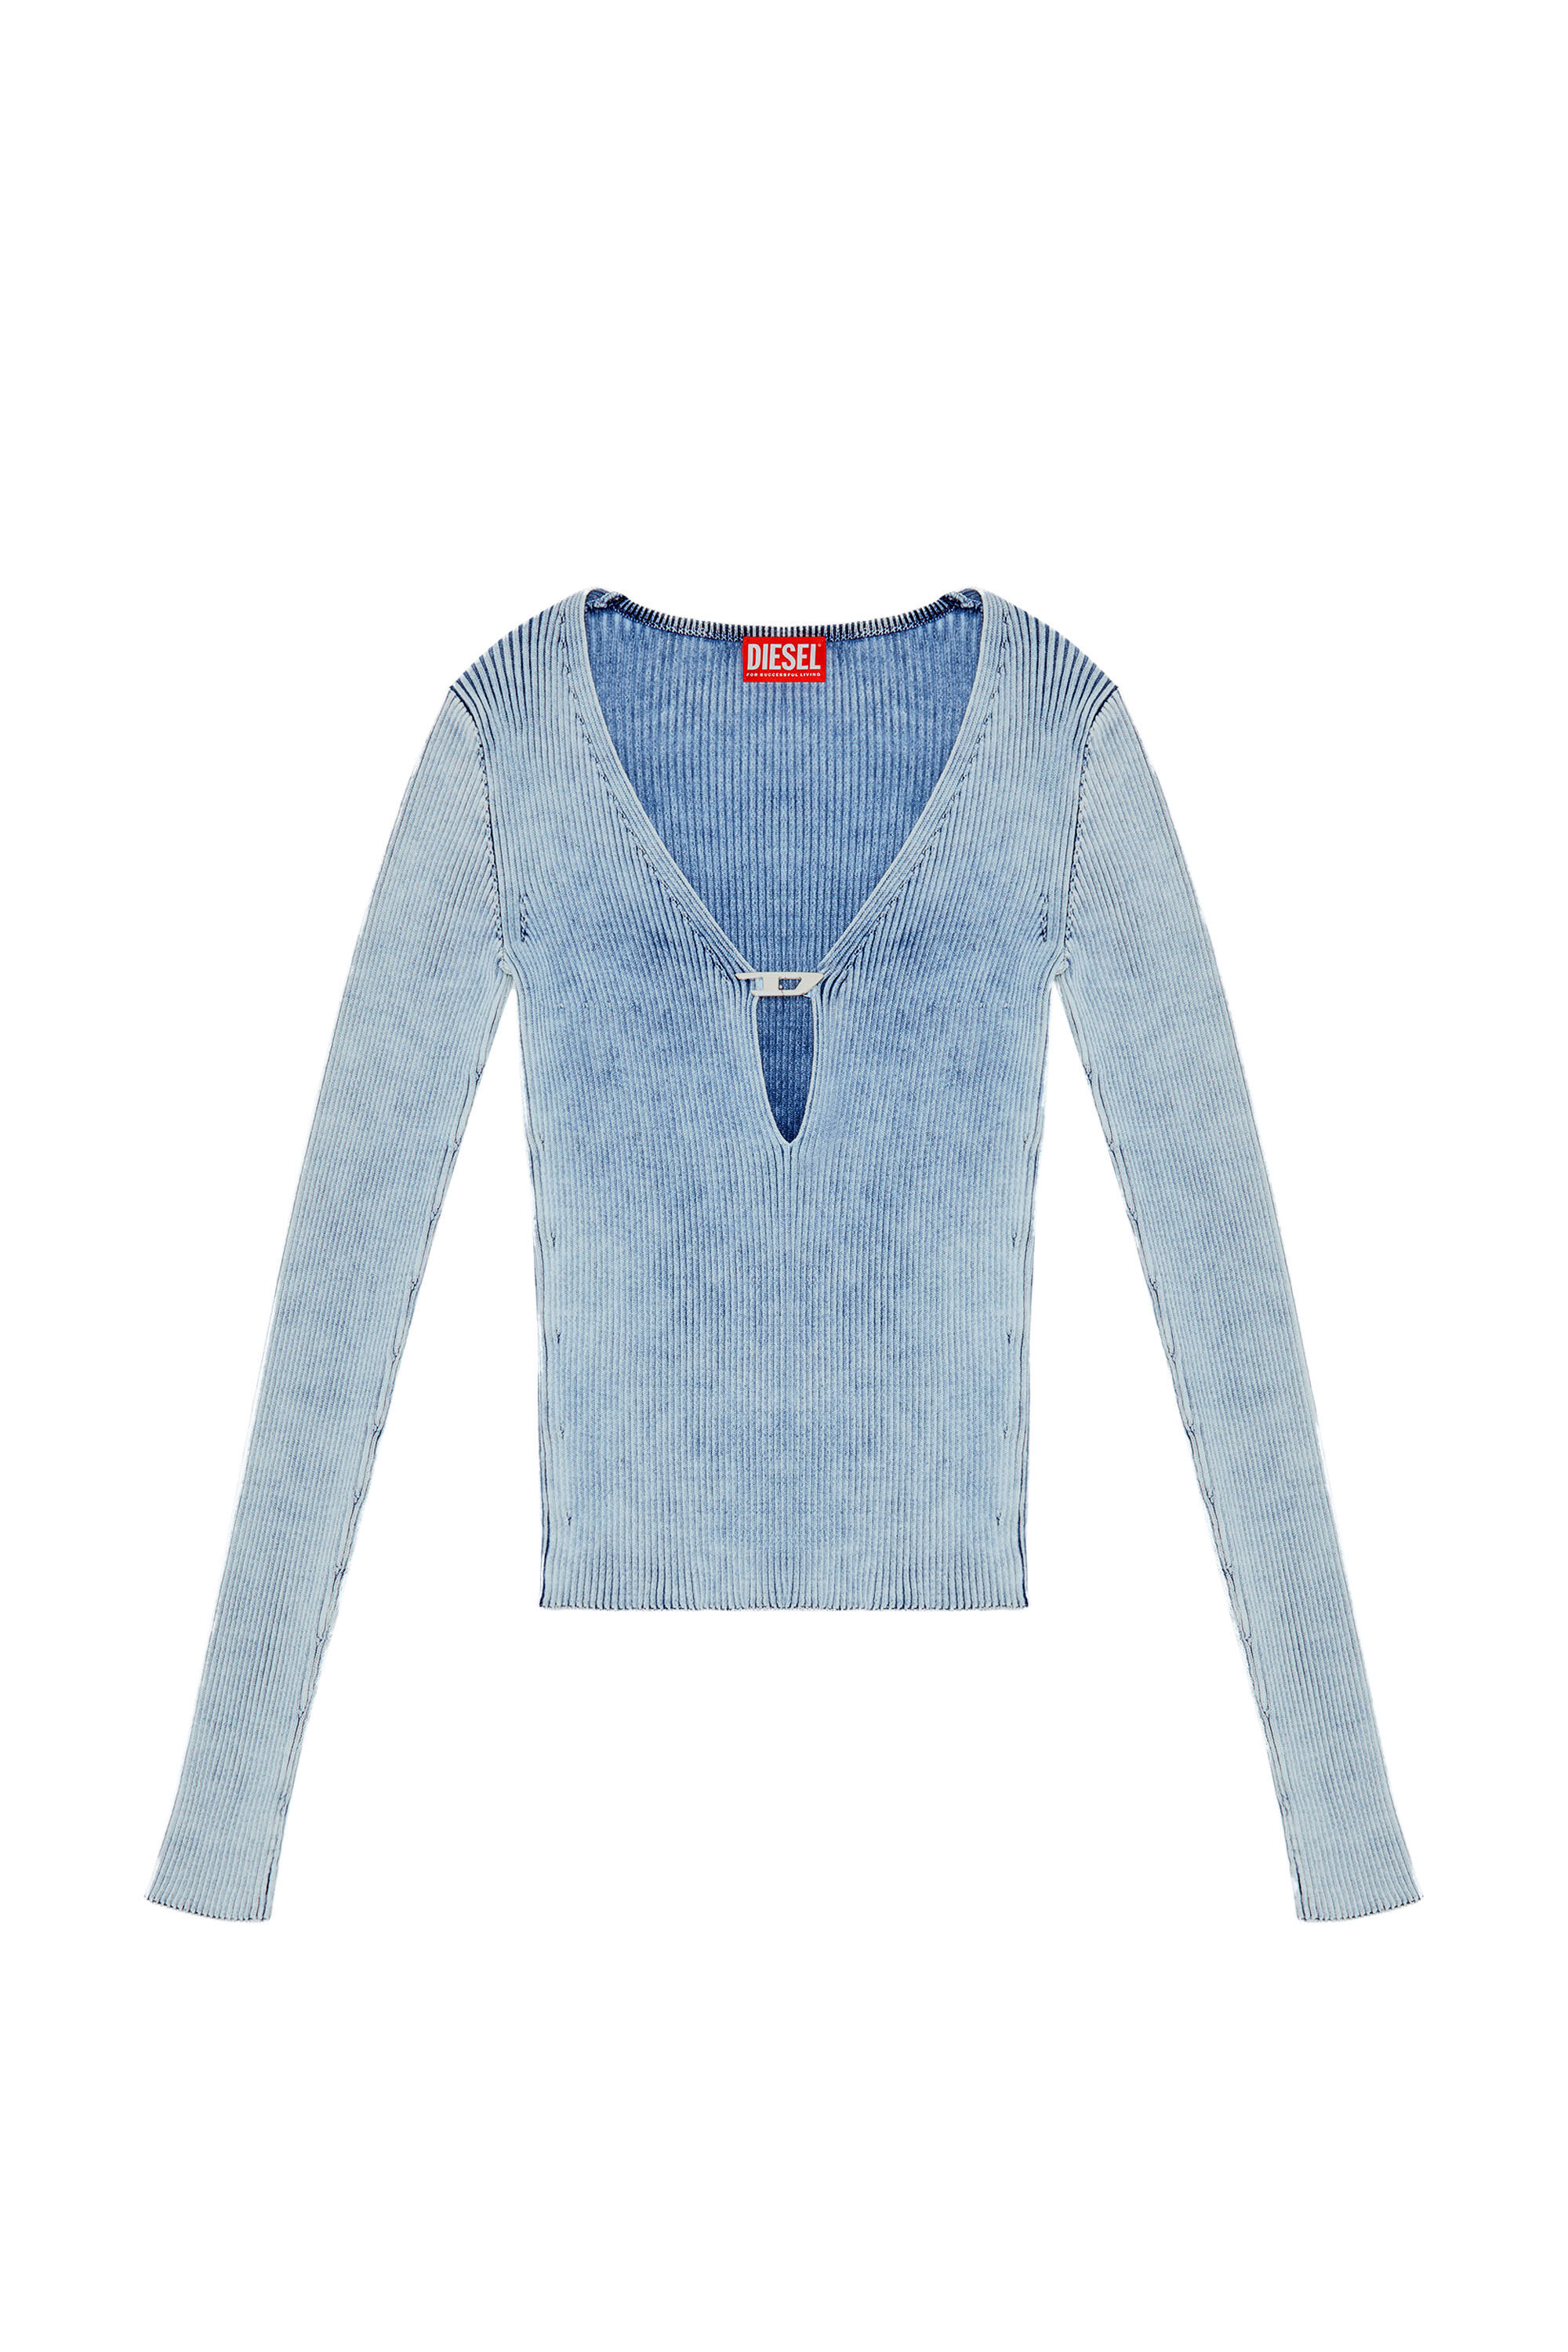 Diesel - M-TERI, Woman Cut-out top in indigo cotton knit in Blue - Image 2